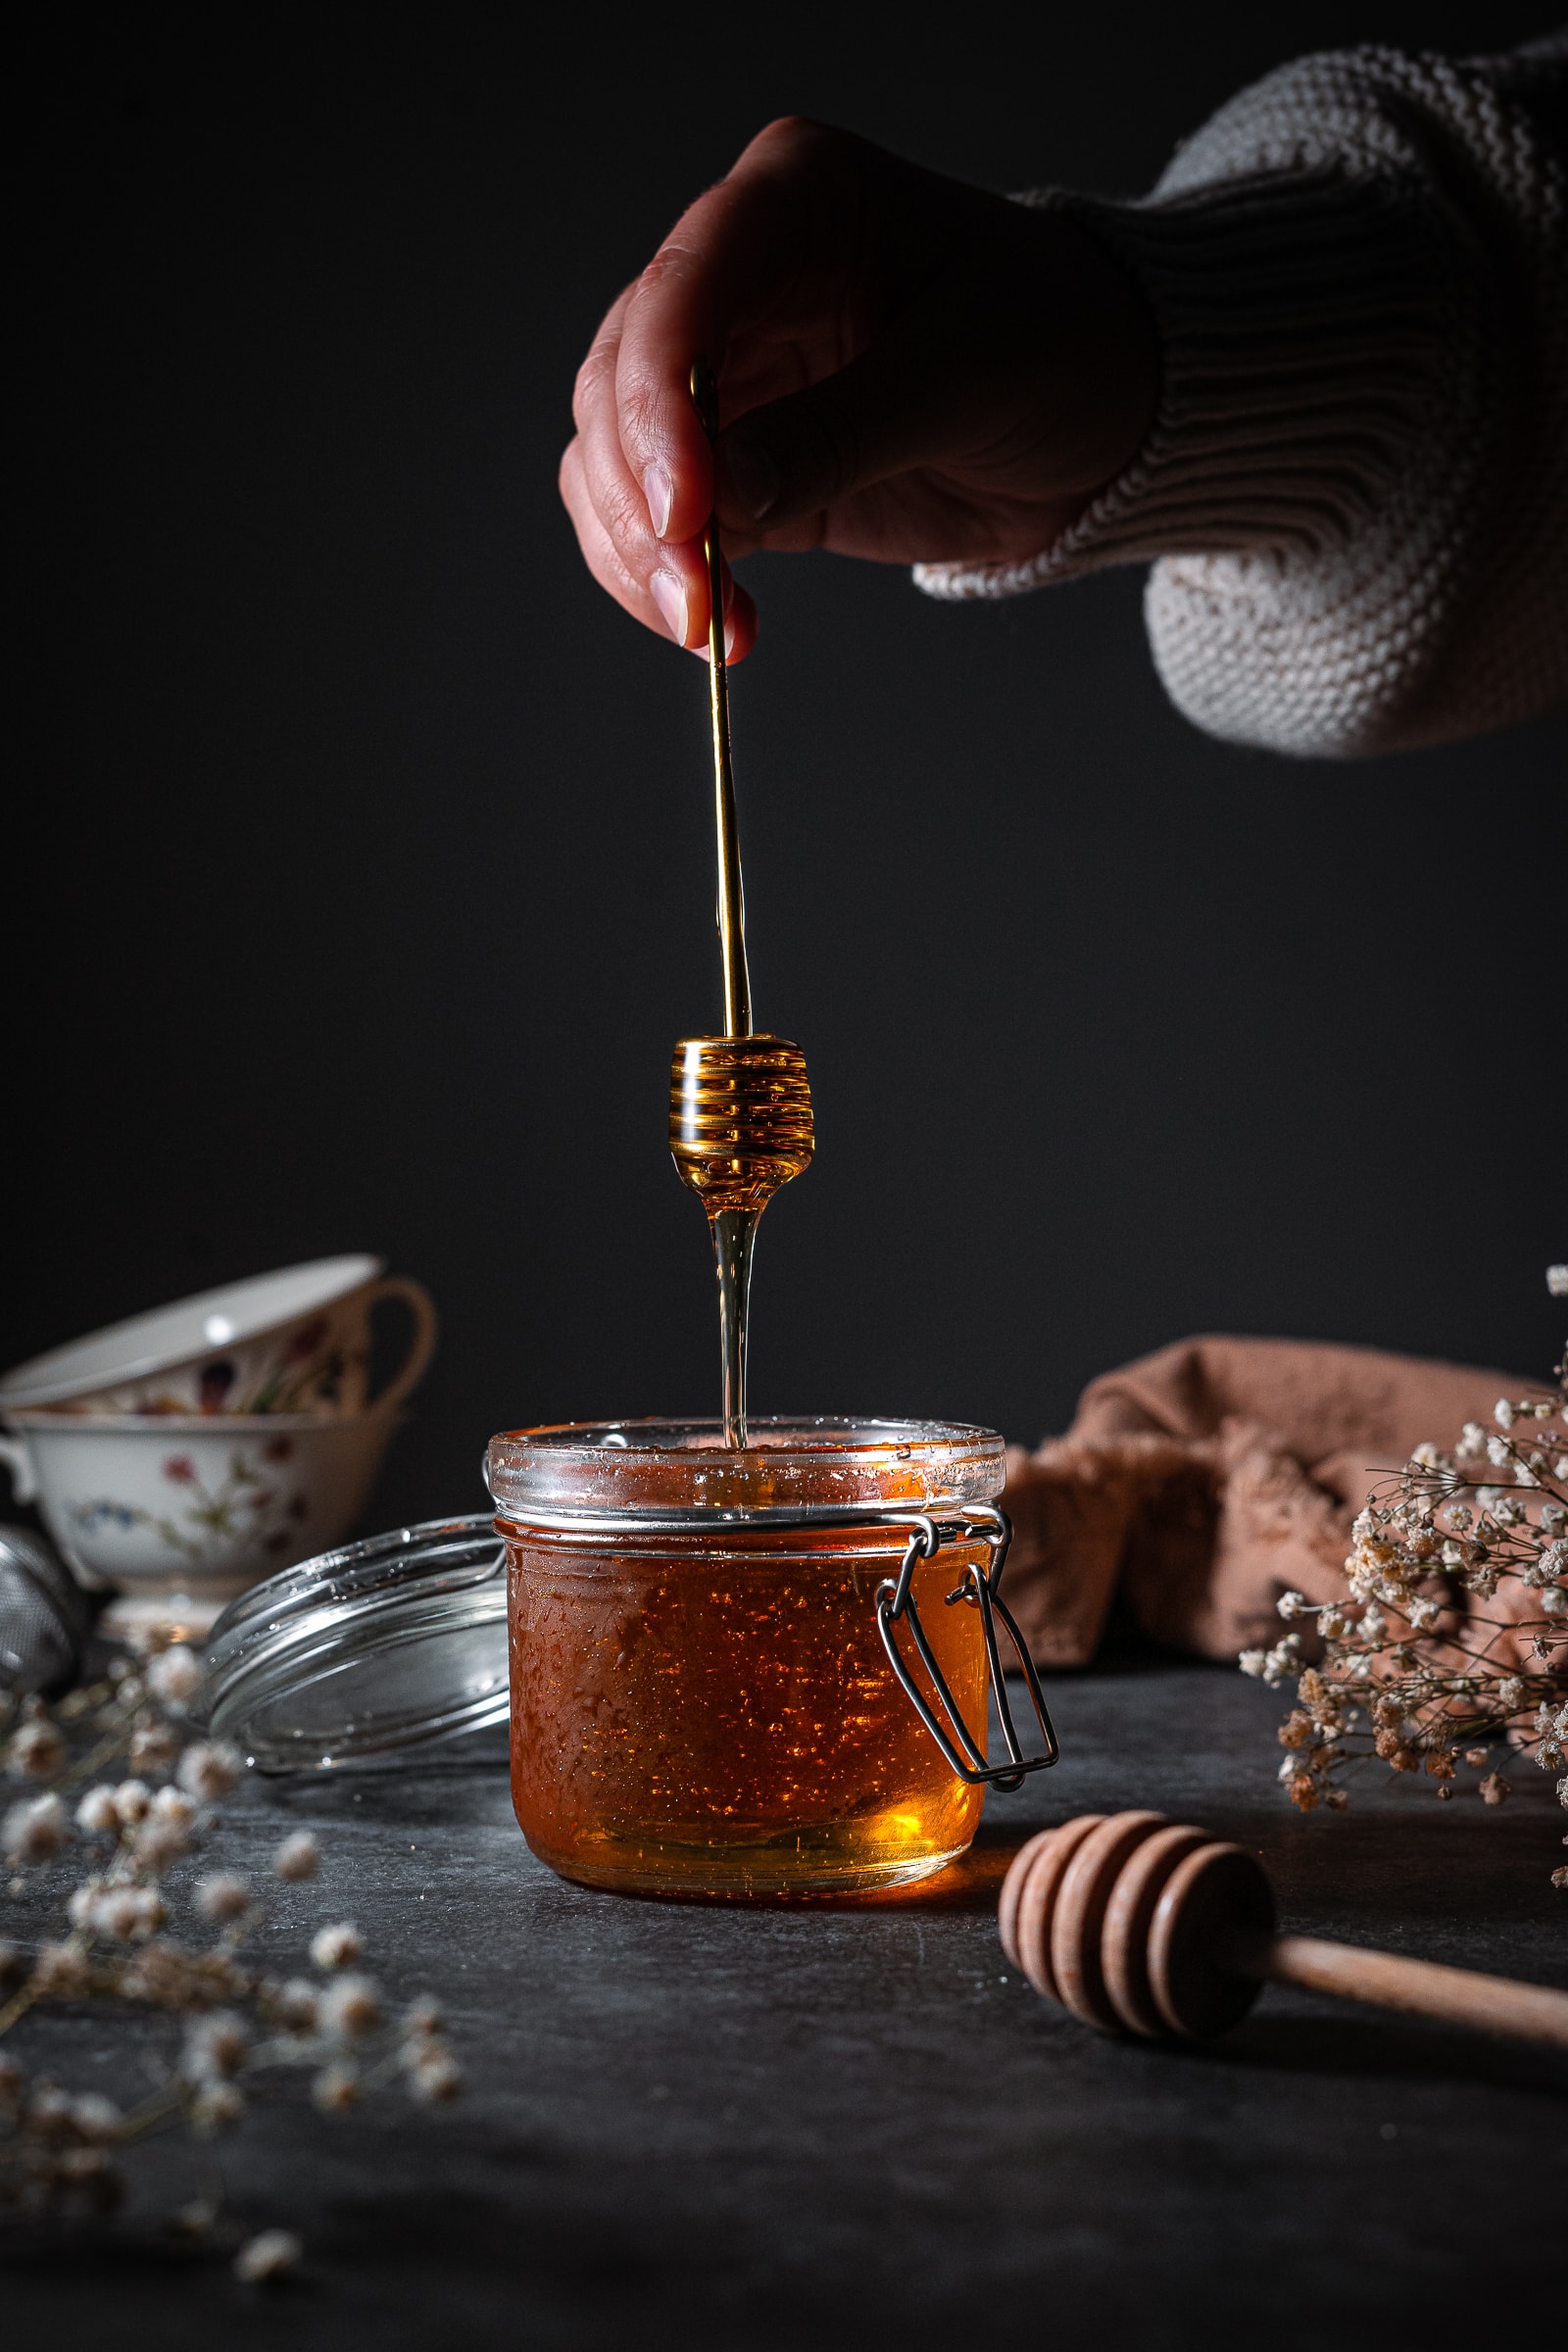 honey being pulled to show texture.